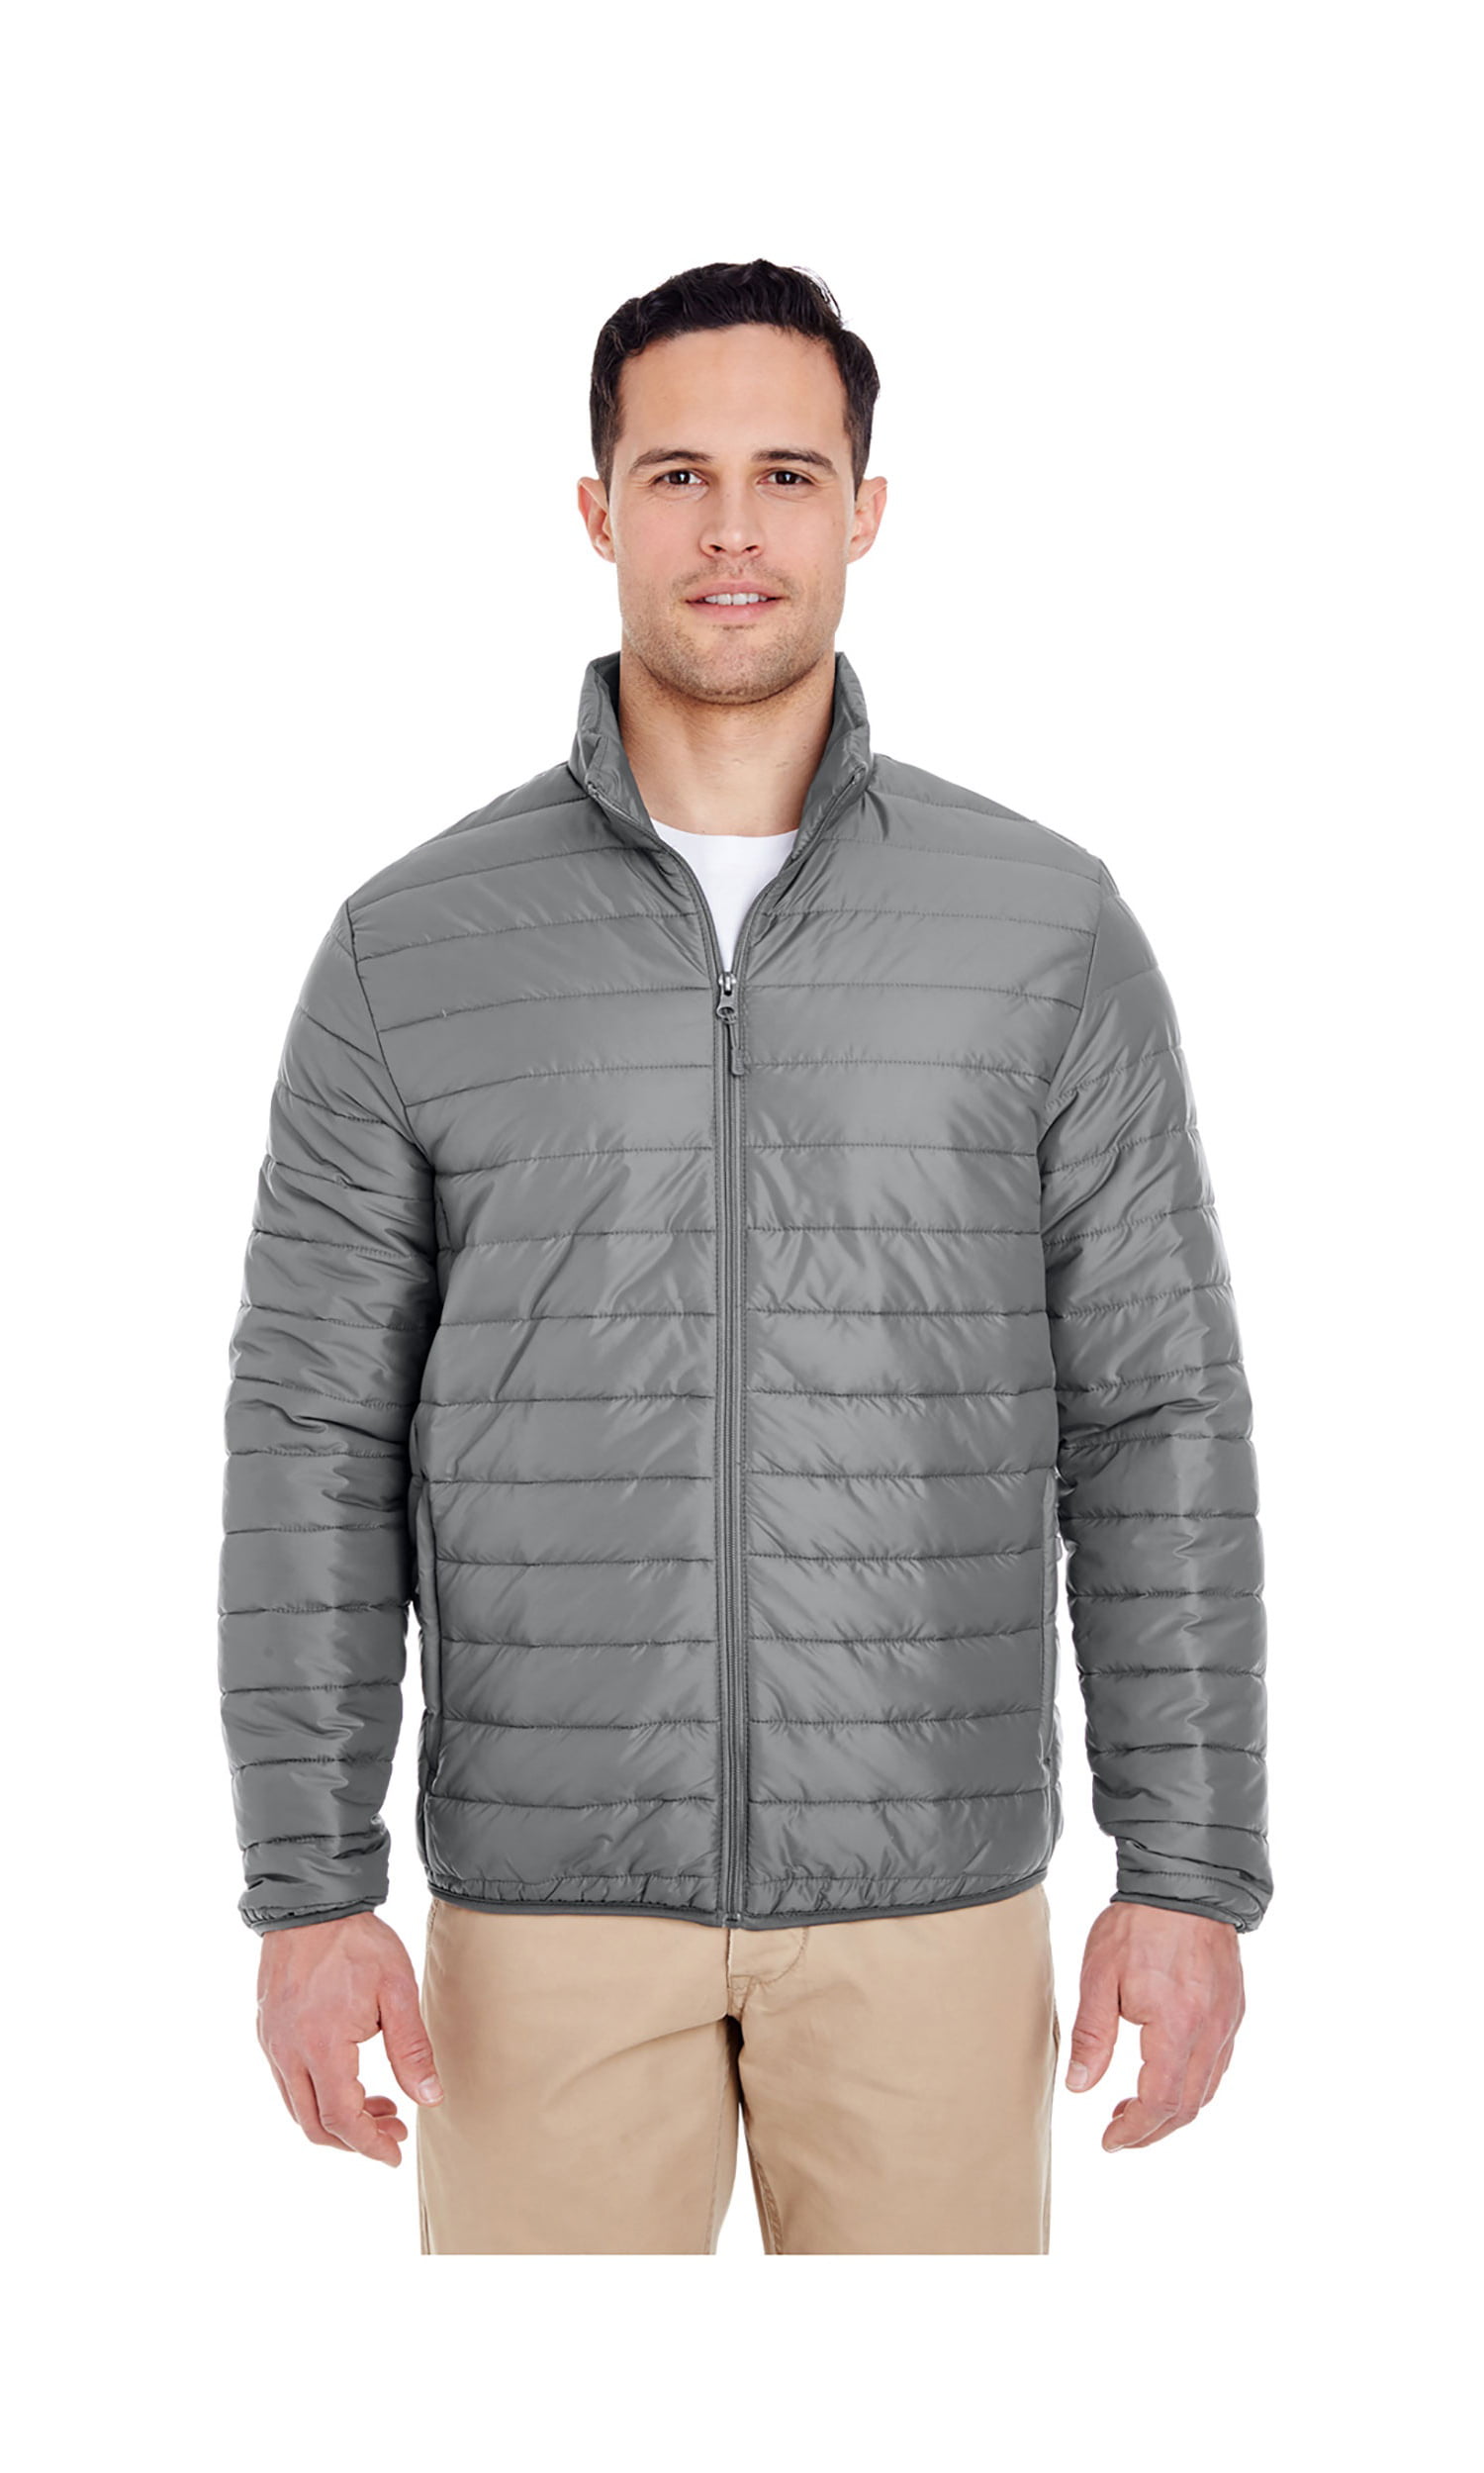 UltraClub Men's Quilted Puffy Jacket, Style 8469 - Walmart.com